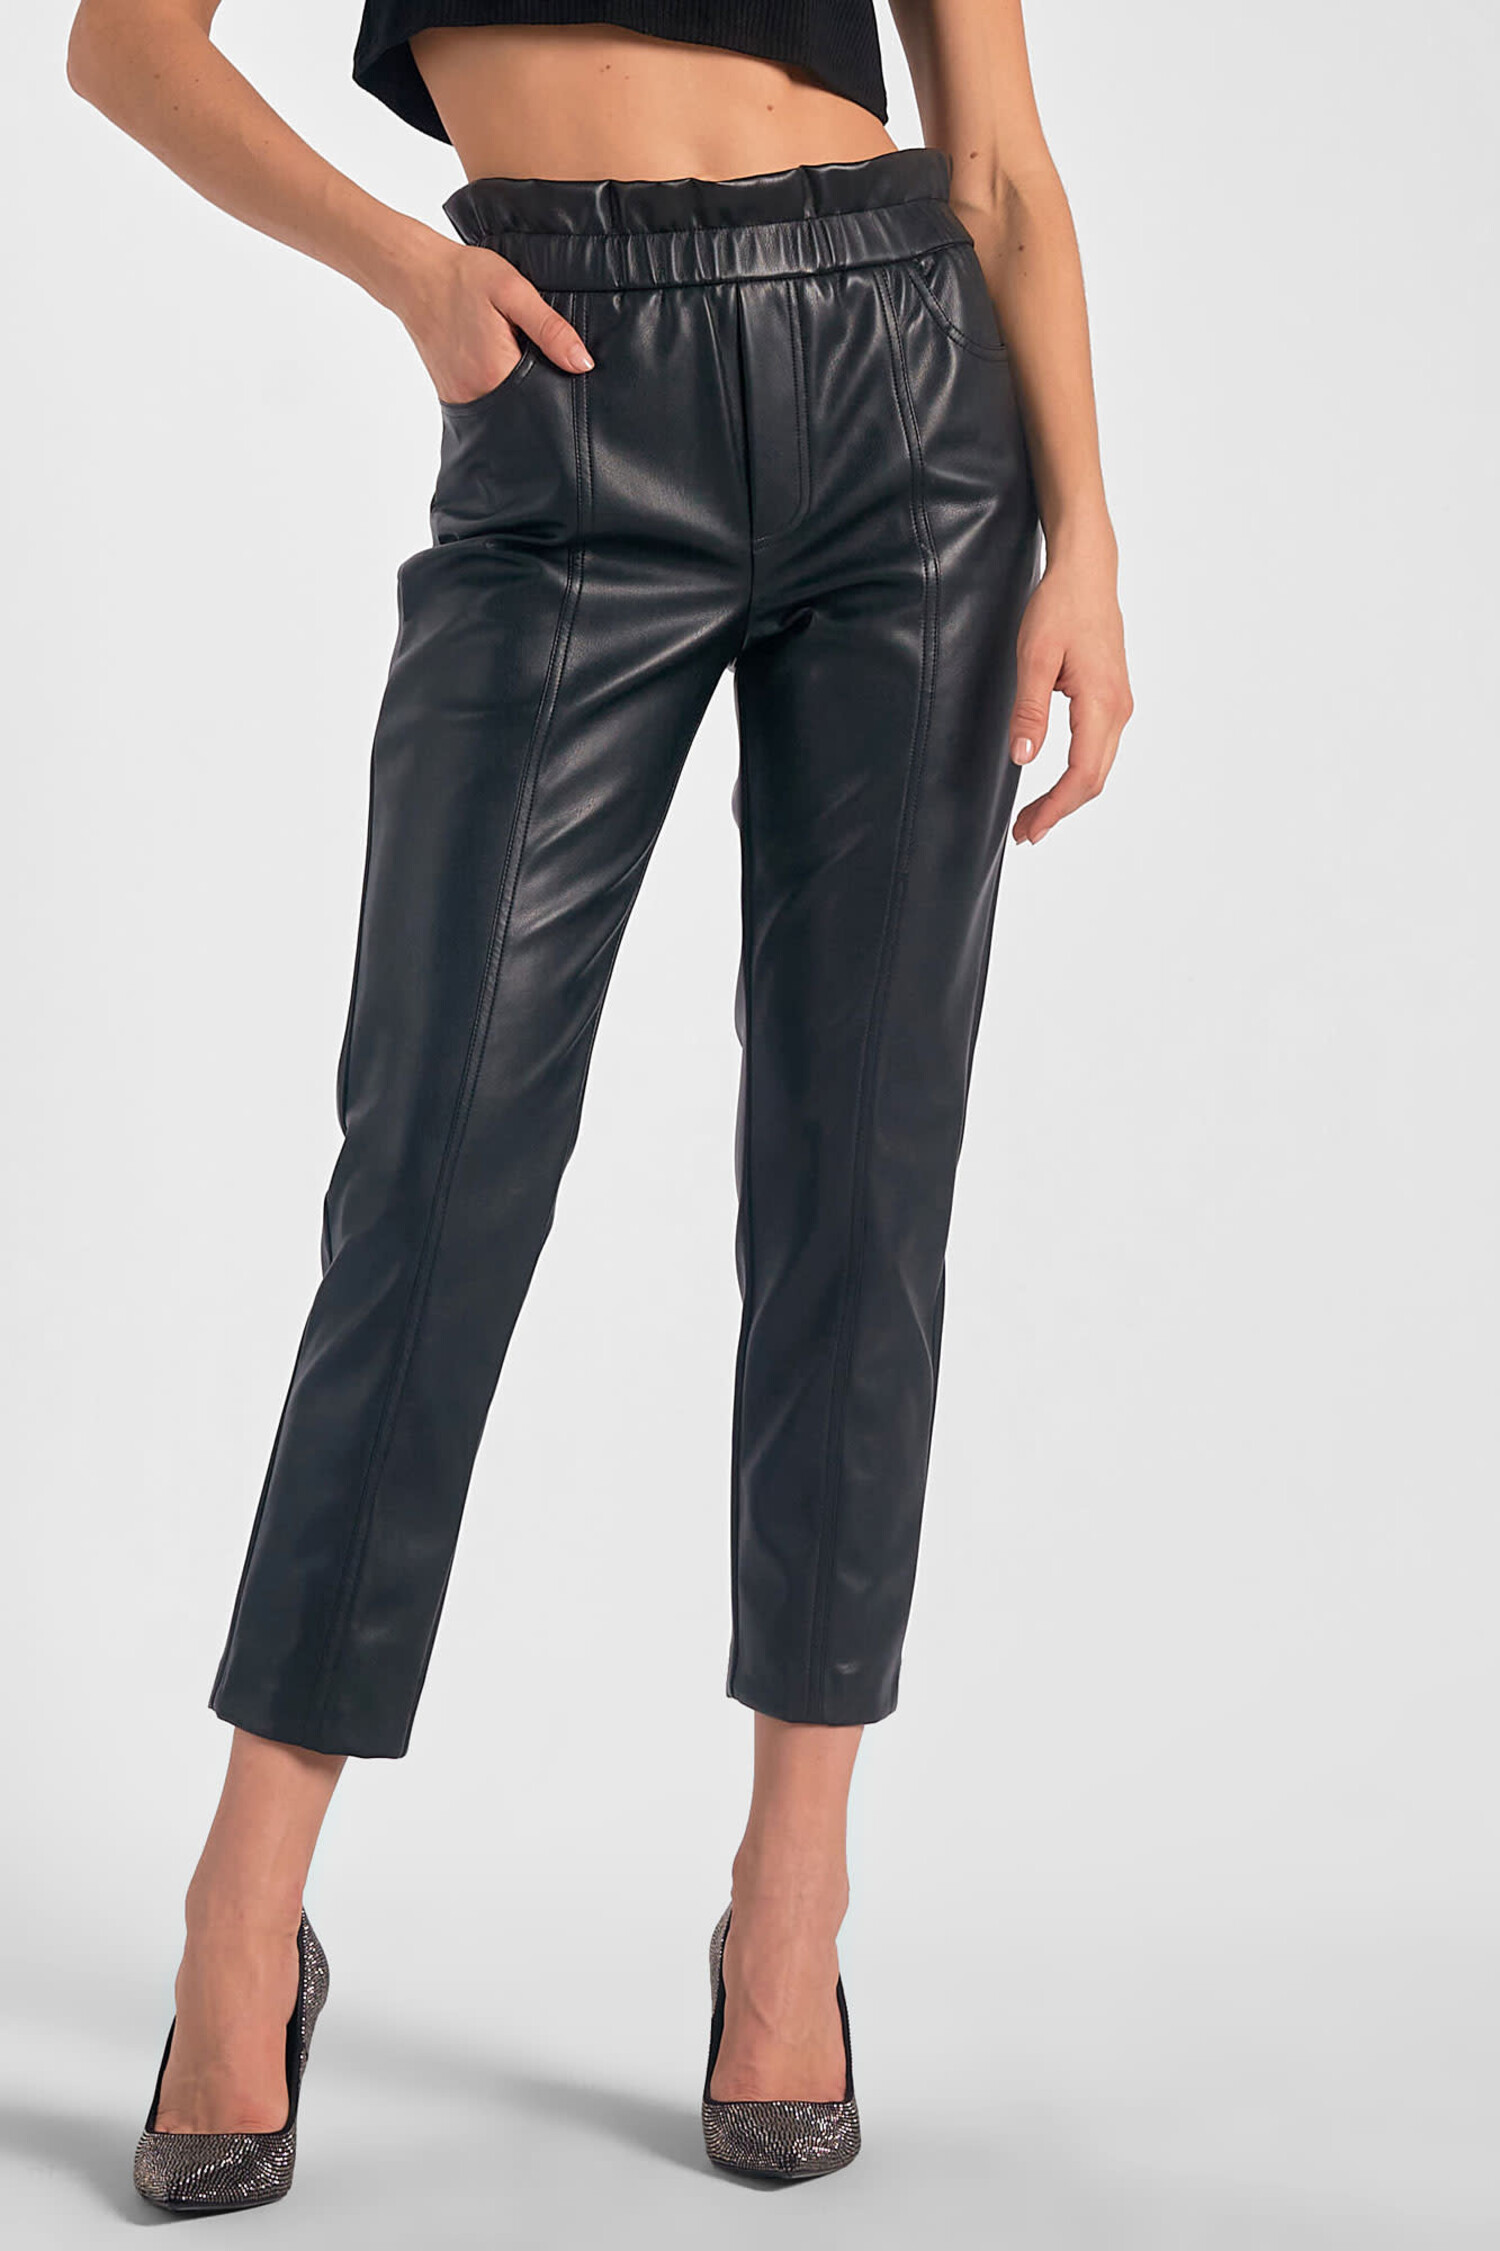 Ruffle Elastic Waist Faux Leather Pant - Society Boutique